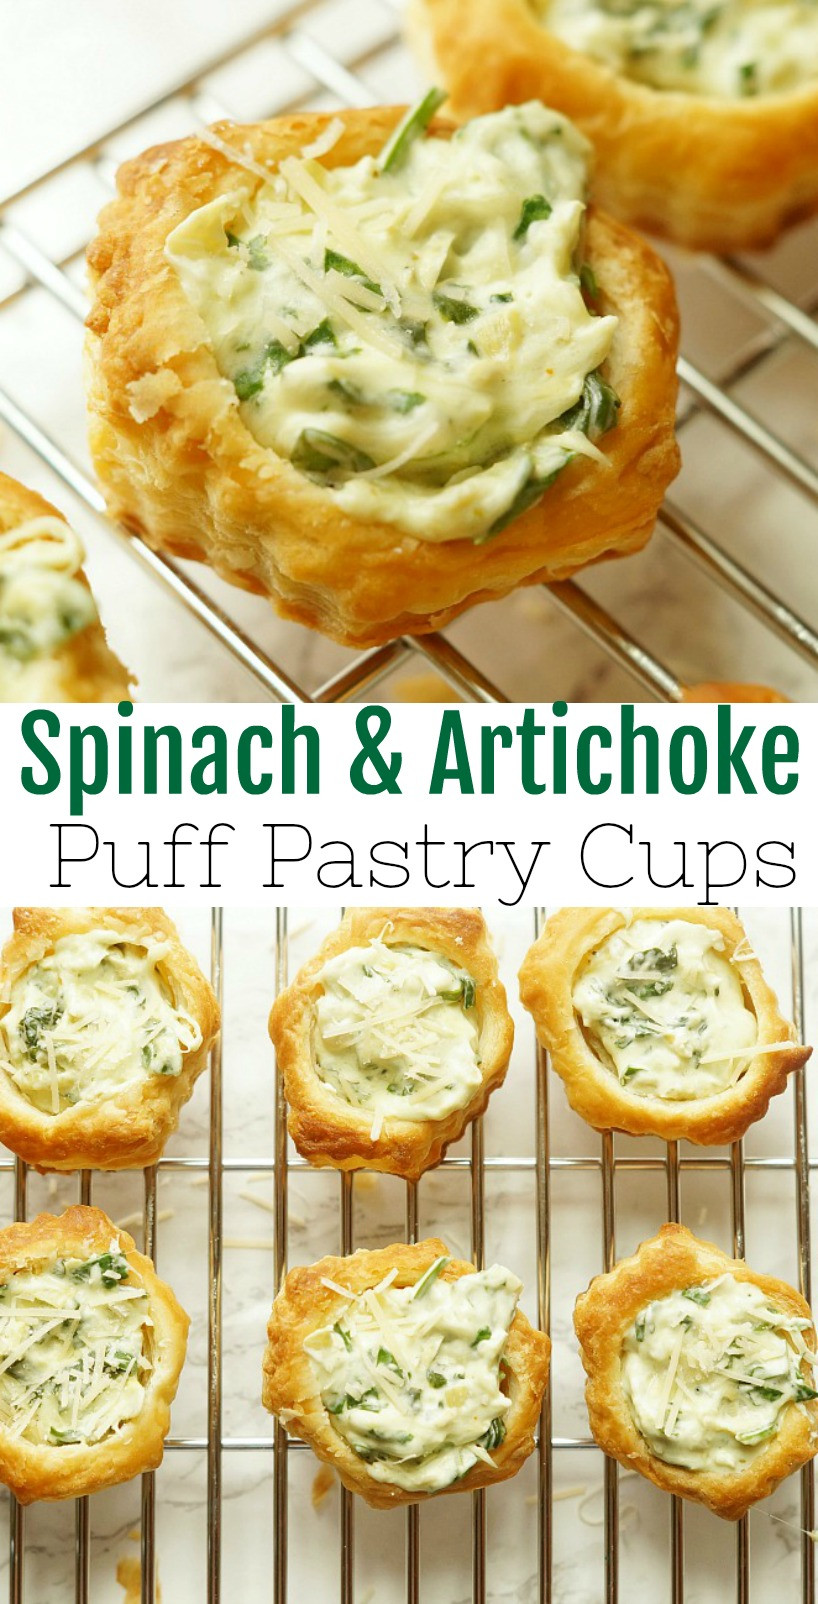 Puff Pastry Cups Appetizers
 Spinach and Artichoke Puff Pastry Cups